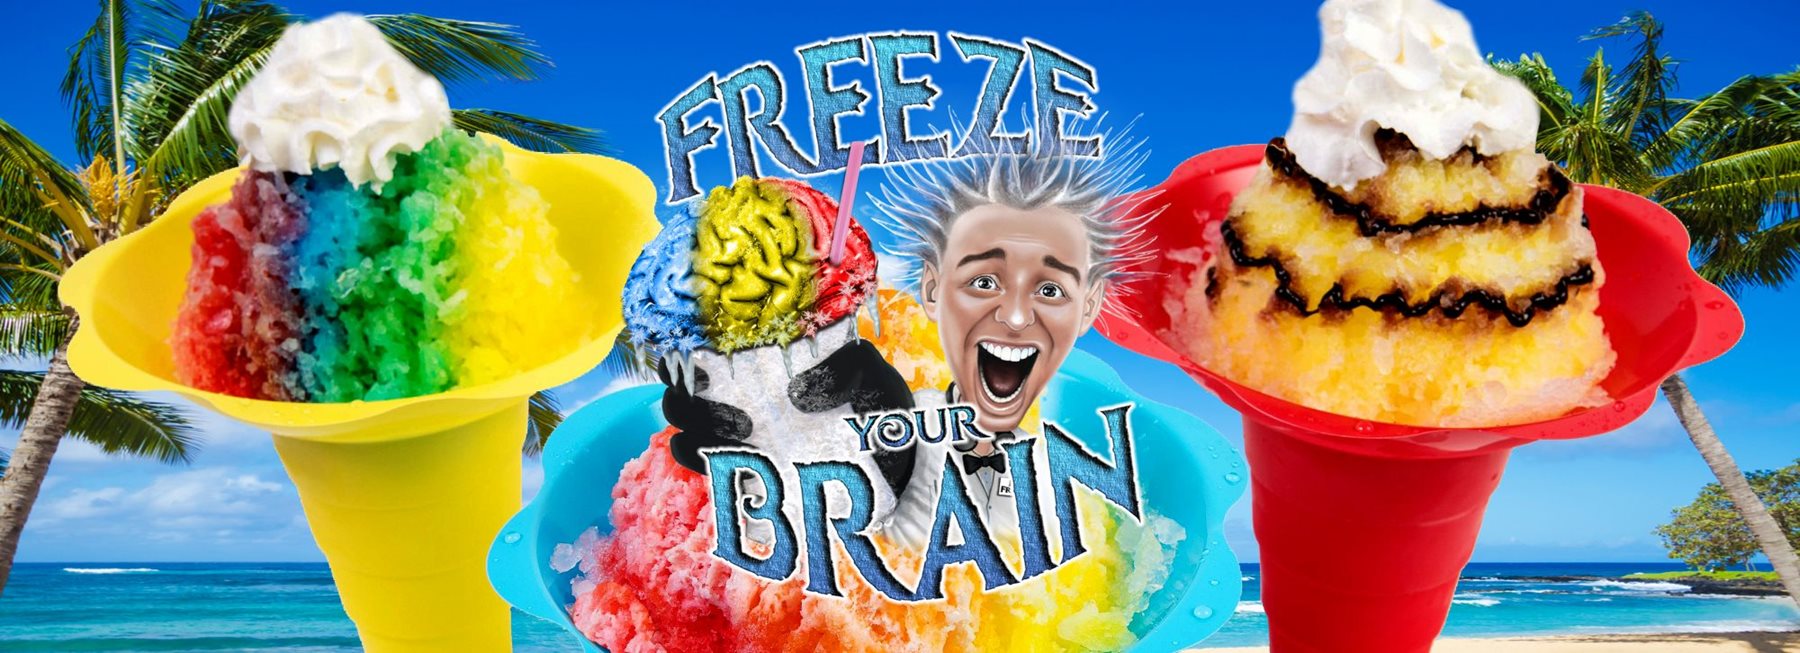 Freeze Your Brain Shave Ice